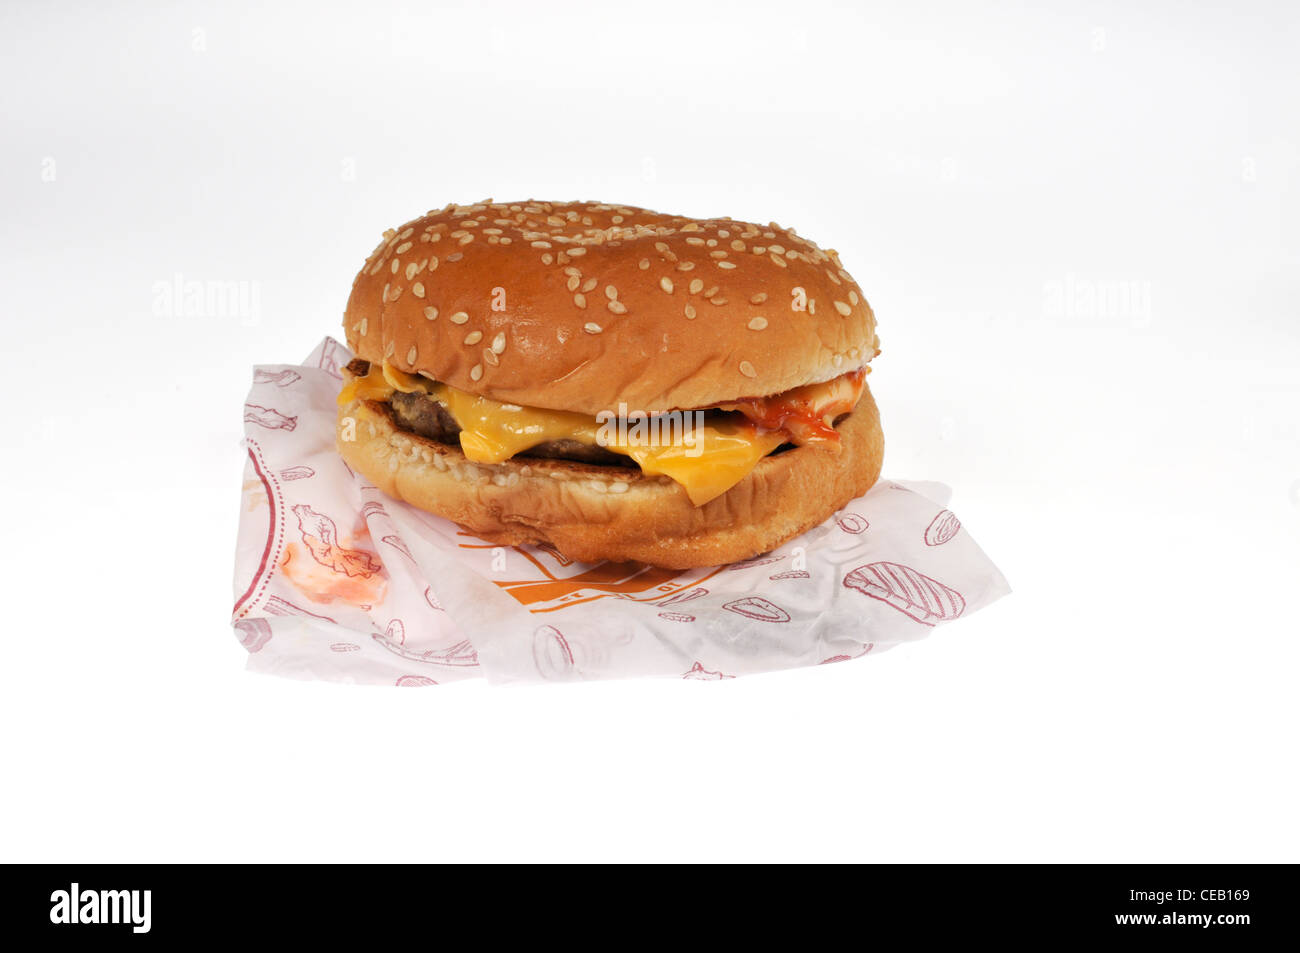 Burger King double cheeseburger with wrapper packaging on white background cutout. Stock Photo